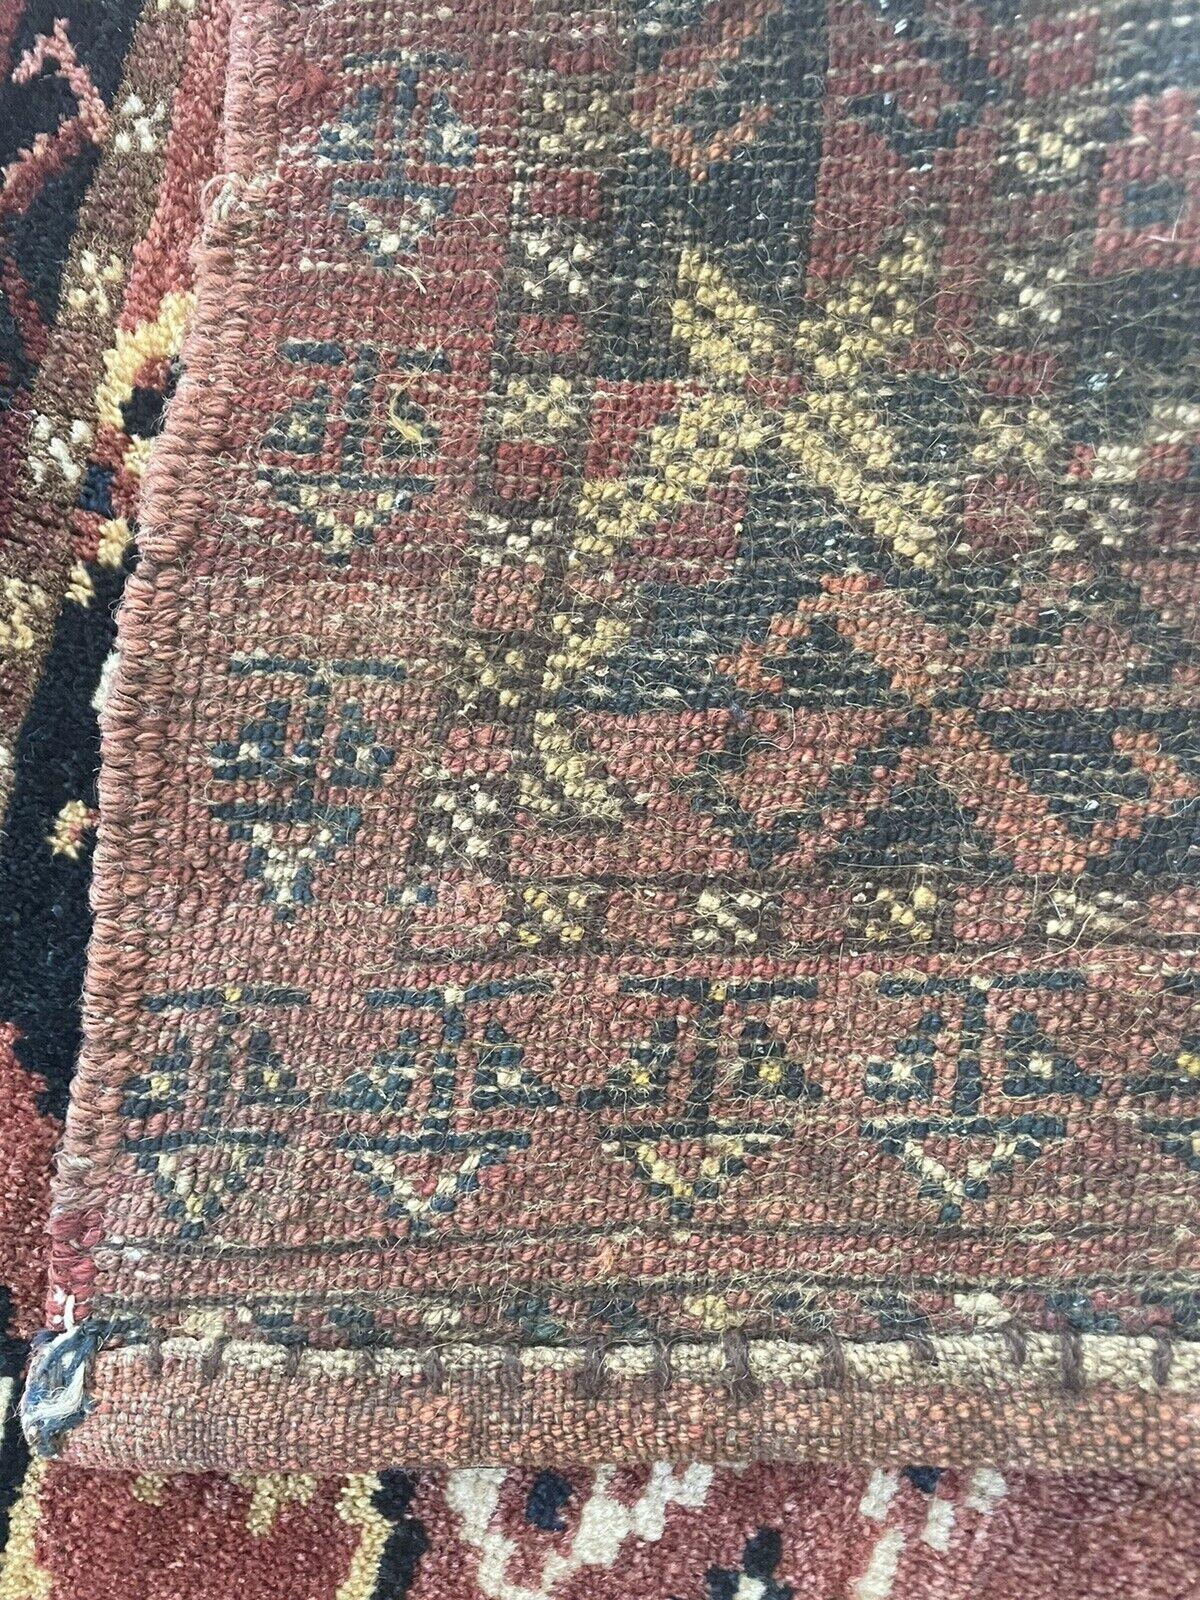 Handmade Antique Afghan Beshir Collectible Chuval Rug 1.5' x 4.8', 1900s - 1N11 For Sale 8